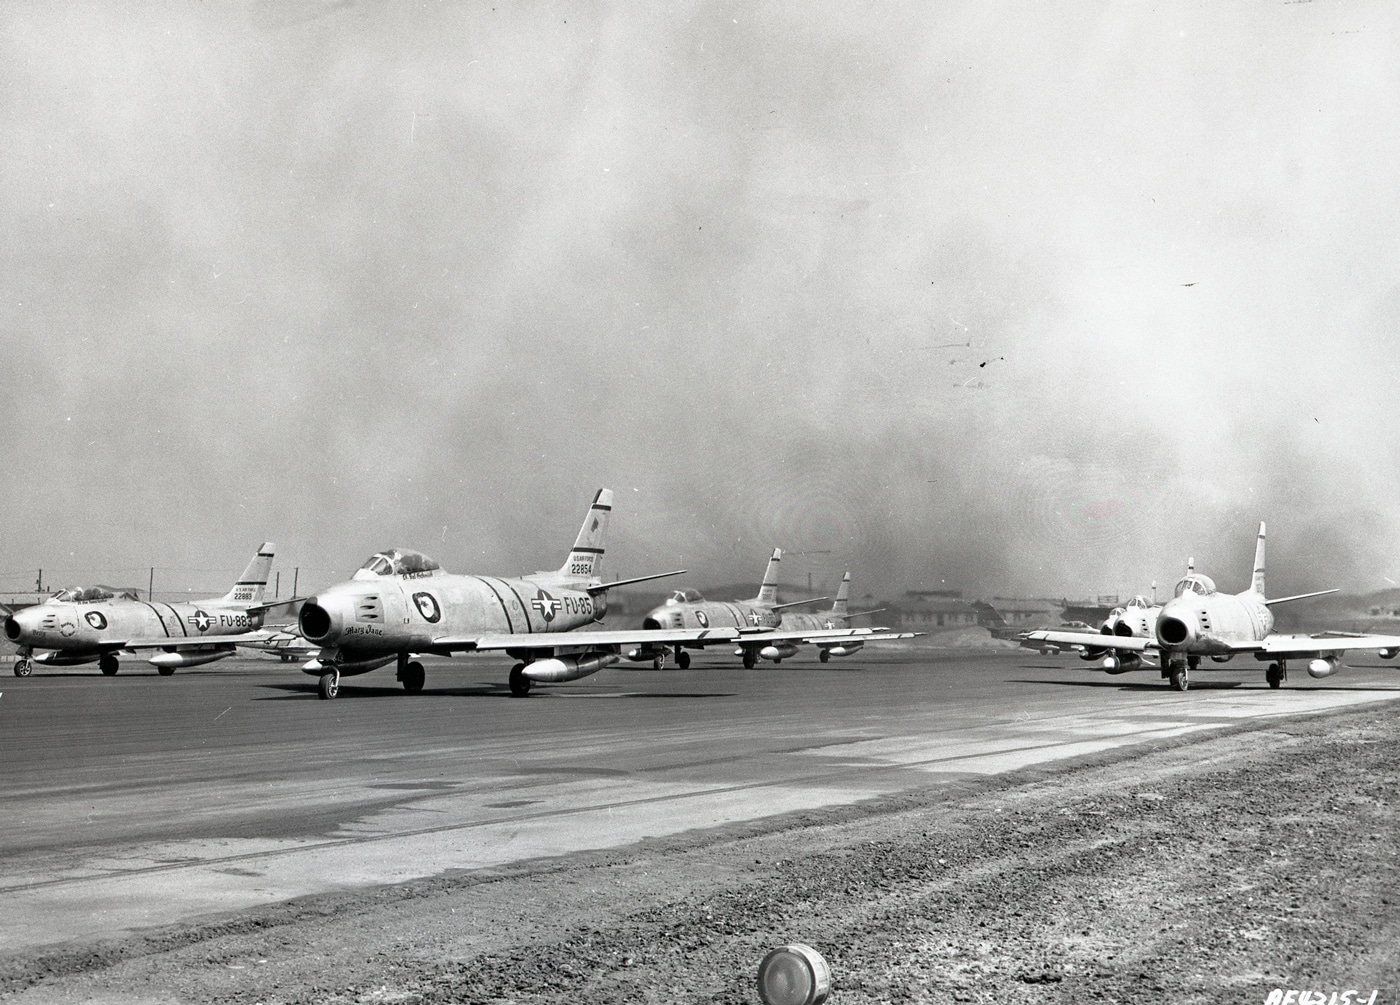 In this photo we can see plumes of black smoke flowing from the exhaust of these North American Aviation F-86A Sabre interceptors. The jet engines were powerful for this time period which gave the American pilots a significant advantage in both speed and operational ceiling.  Also, the wing configuration allowed for tight turns and nimble maneuvering at all speeds.